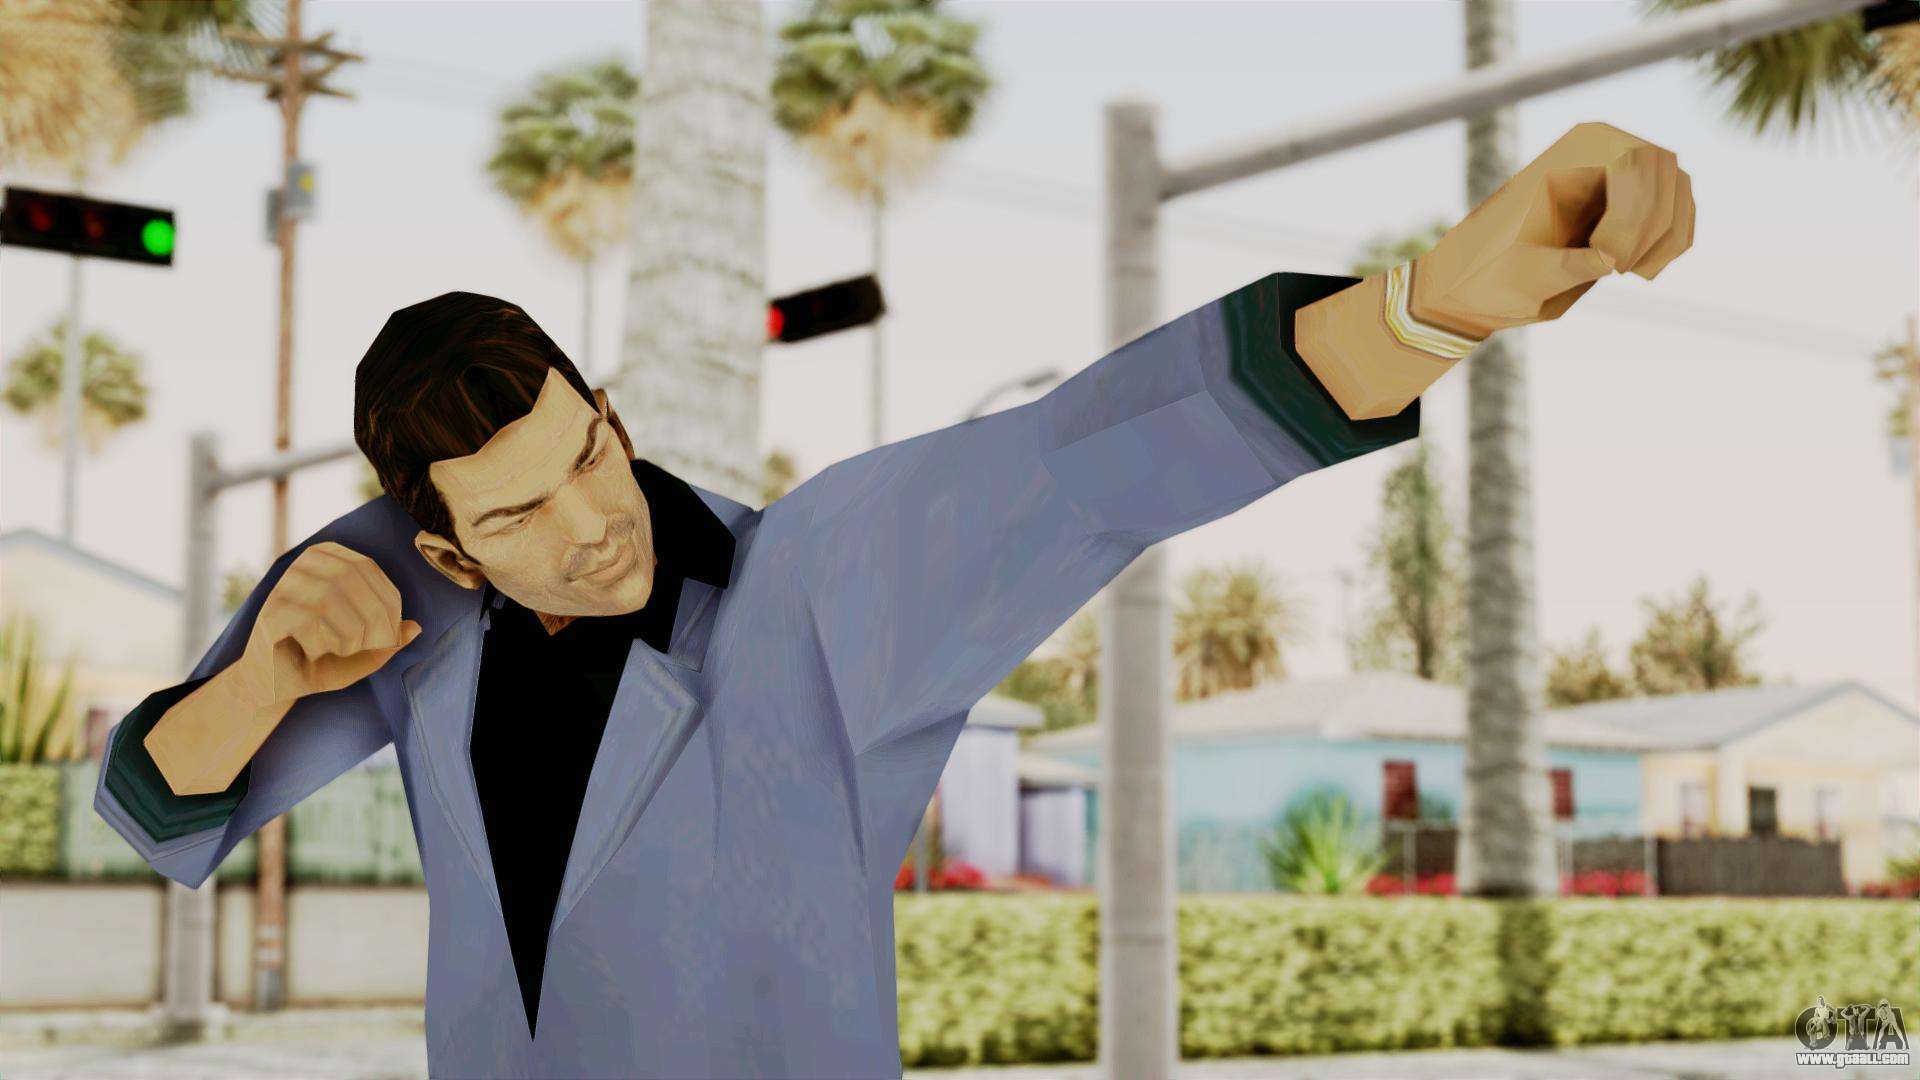 Tommy Vercetti Soiree Outfit from GTA Vice City for GTA 